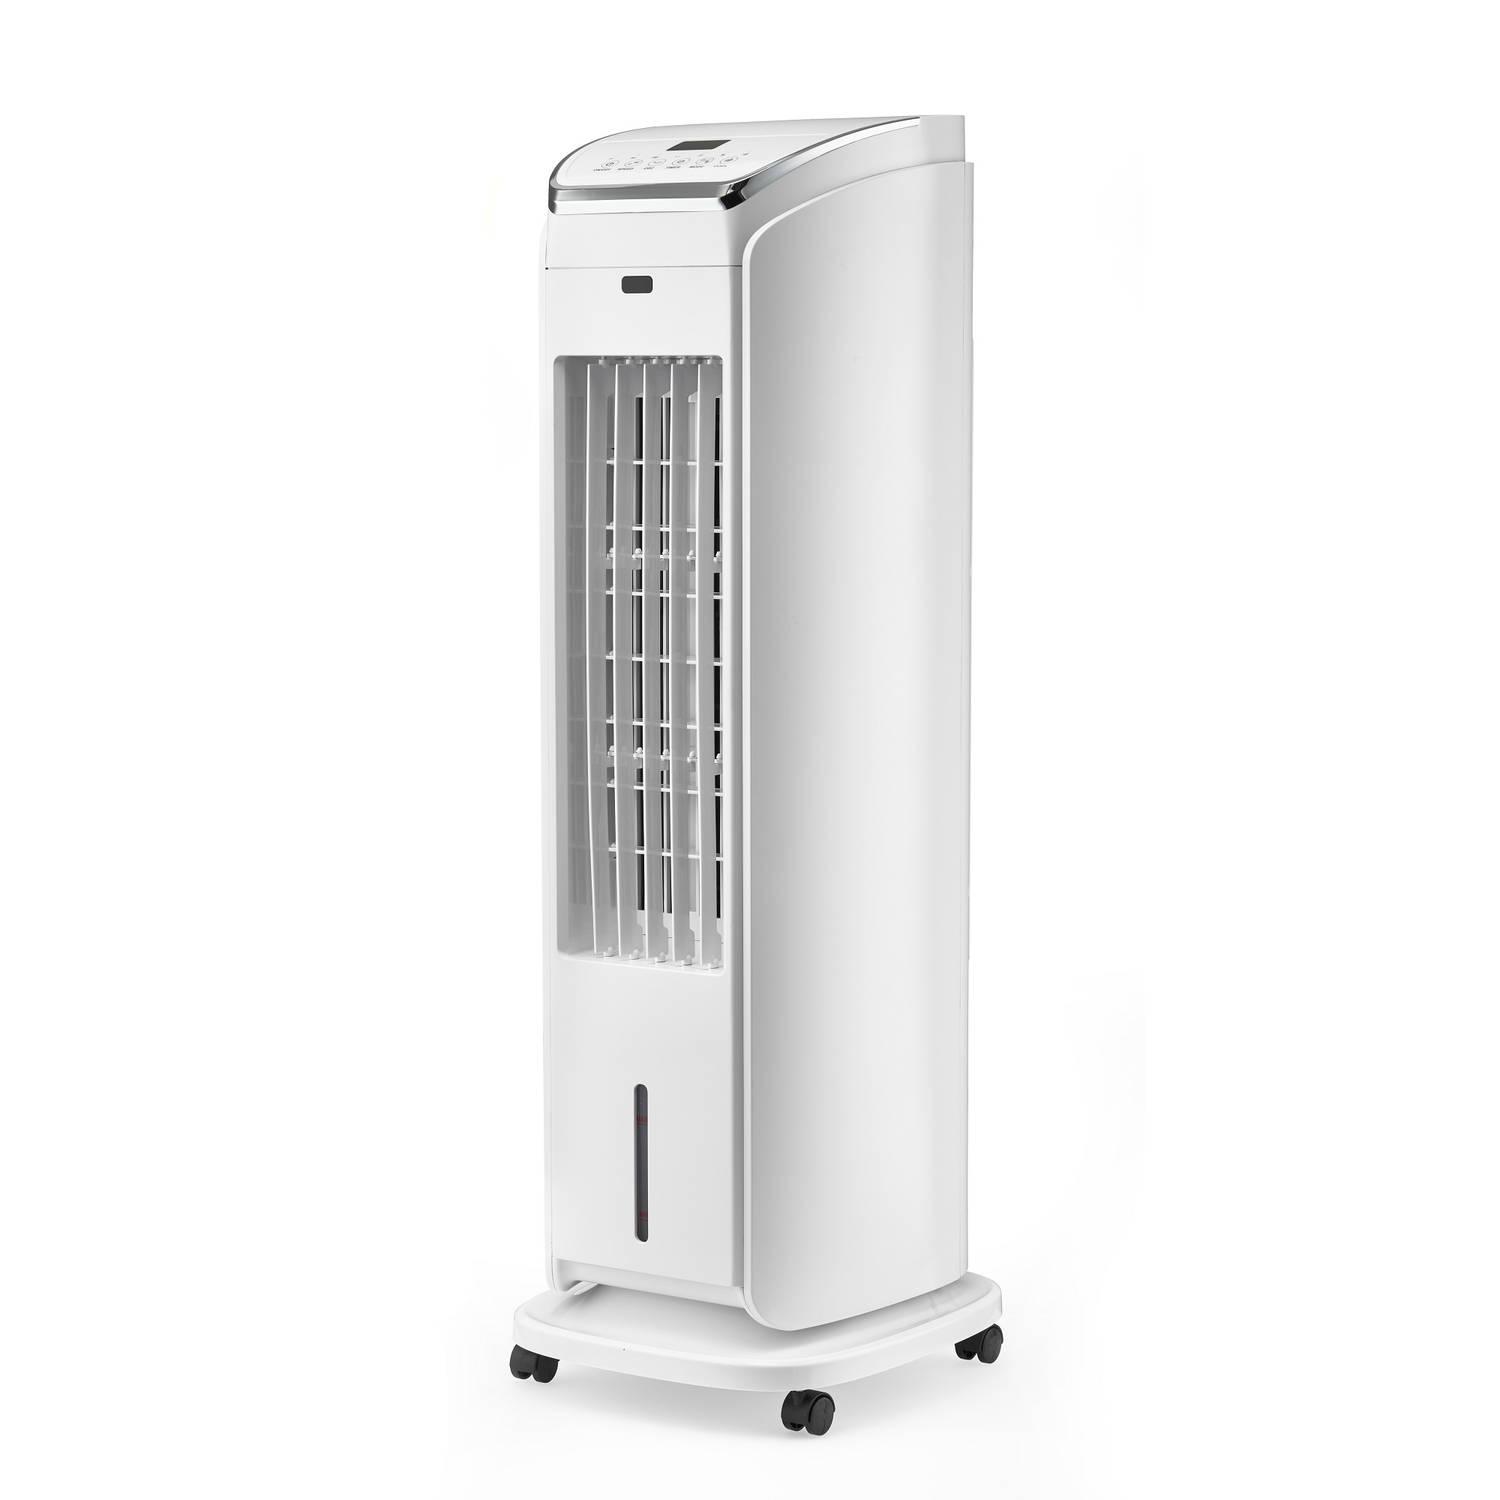 Solis Cool Air 7587 Luchtkoeler Aircooler Wit